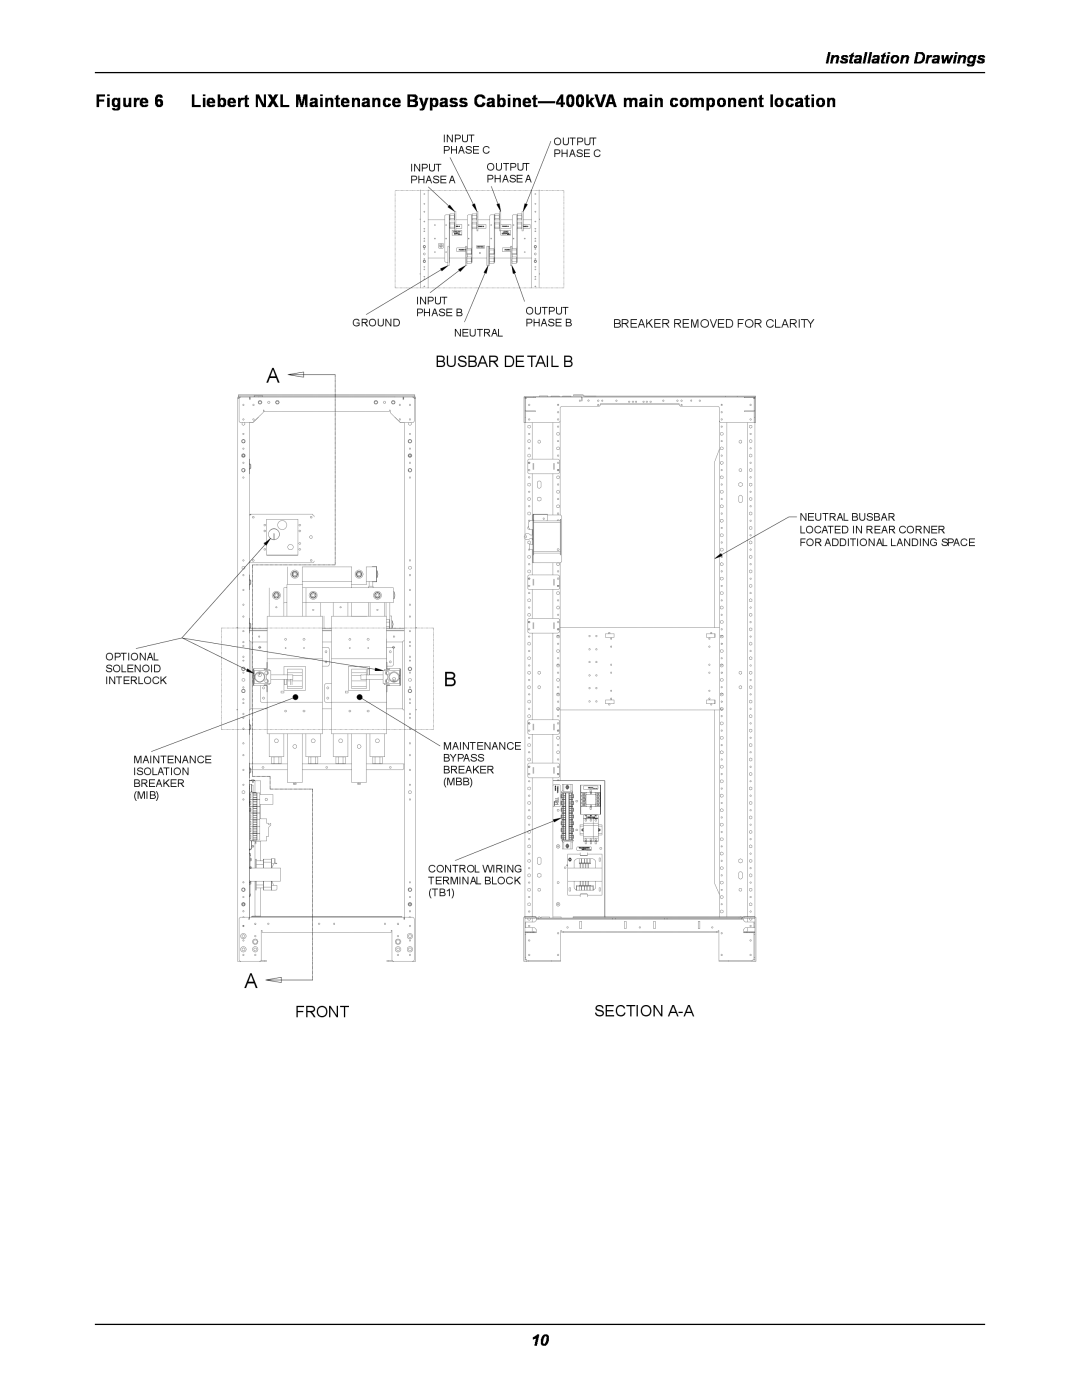 Emerson UPS Systems installation manual Installation Drawings, Busbar Detail B, Front, Section A-A 